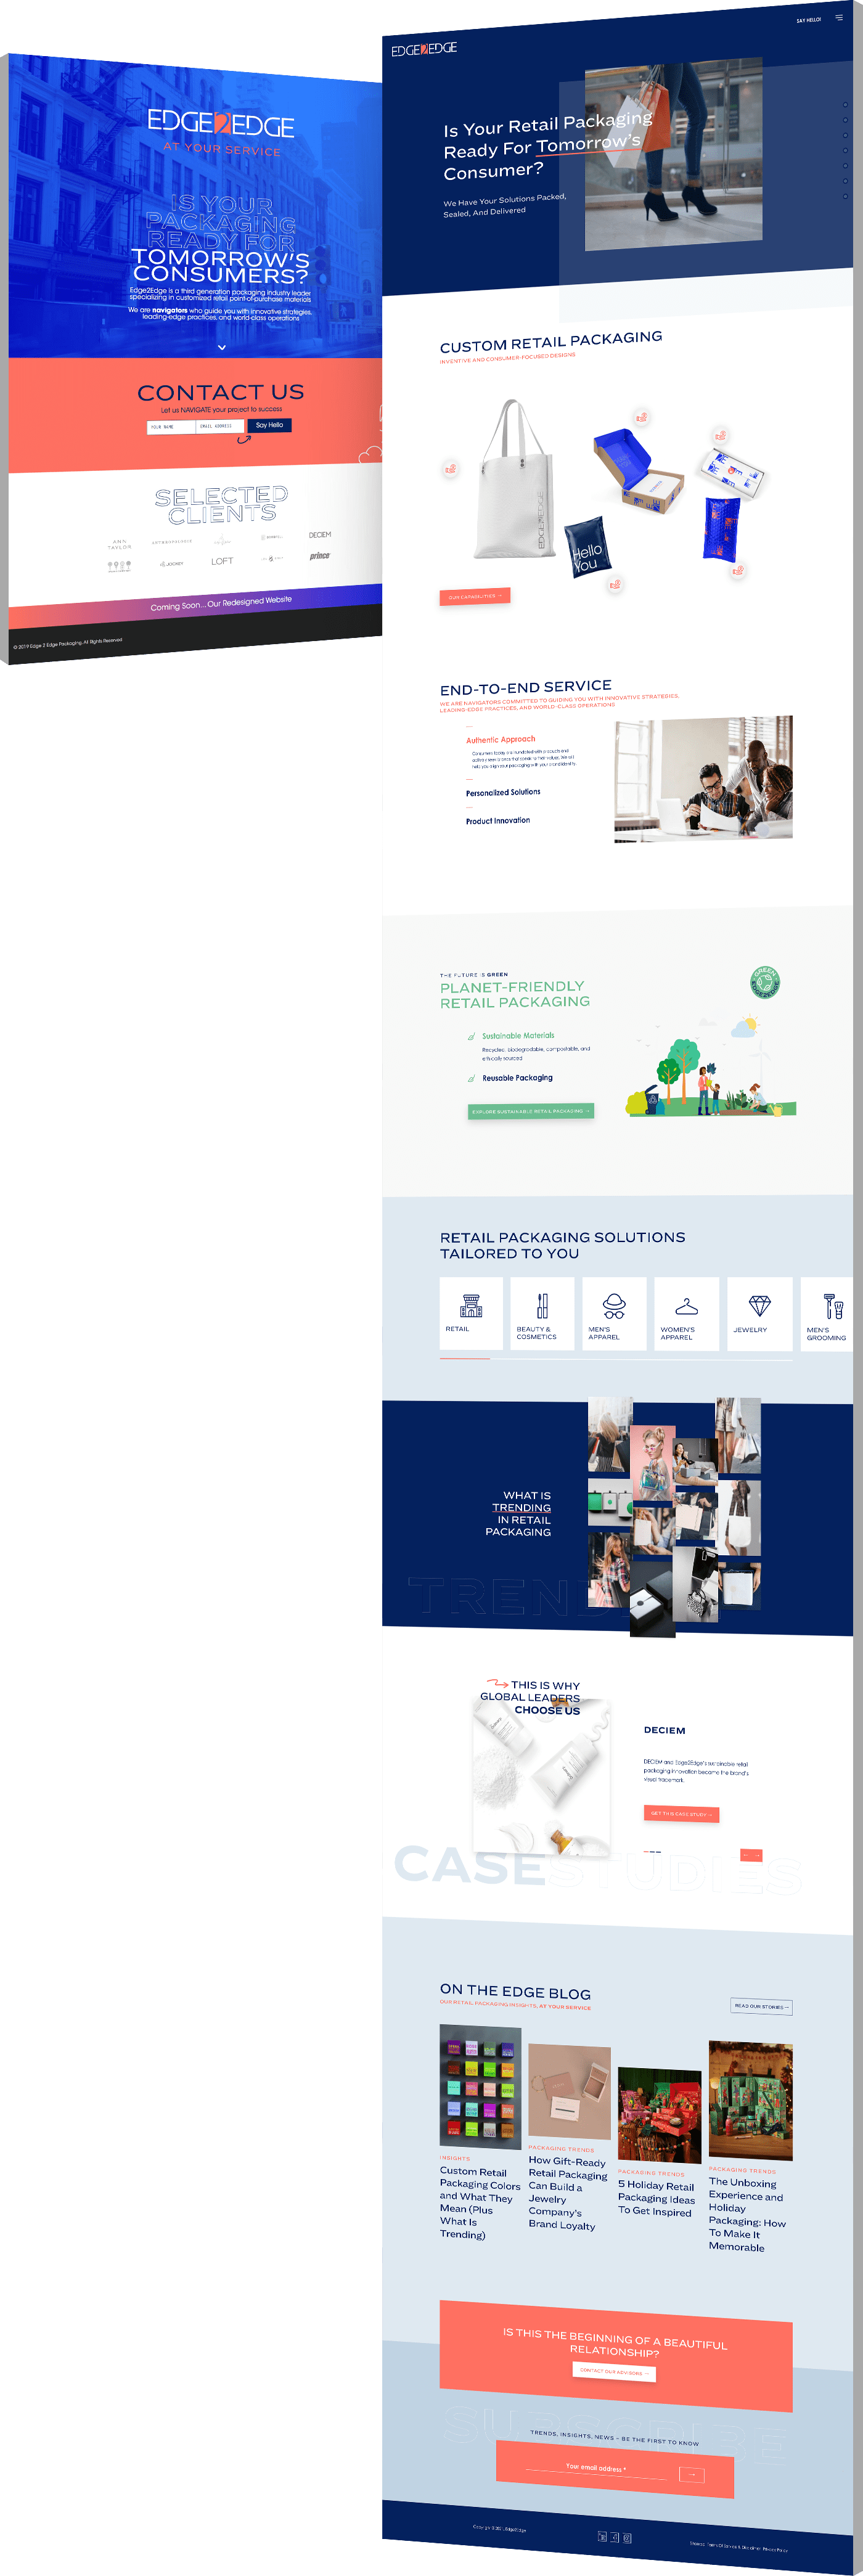 Web design before and after photos of Edge2Edge website